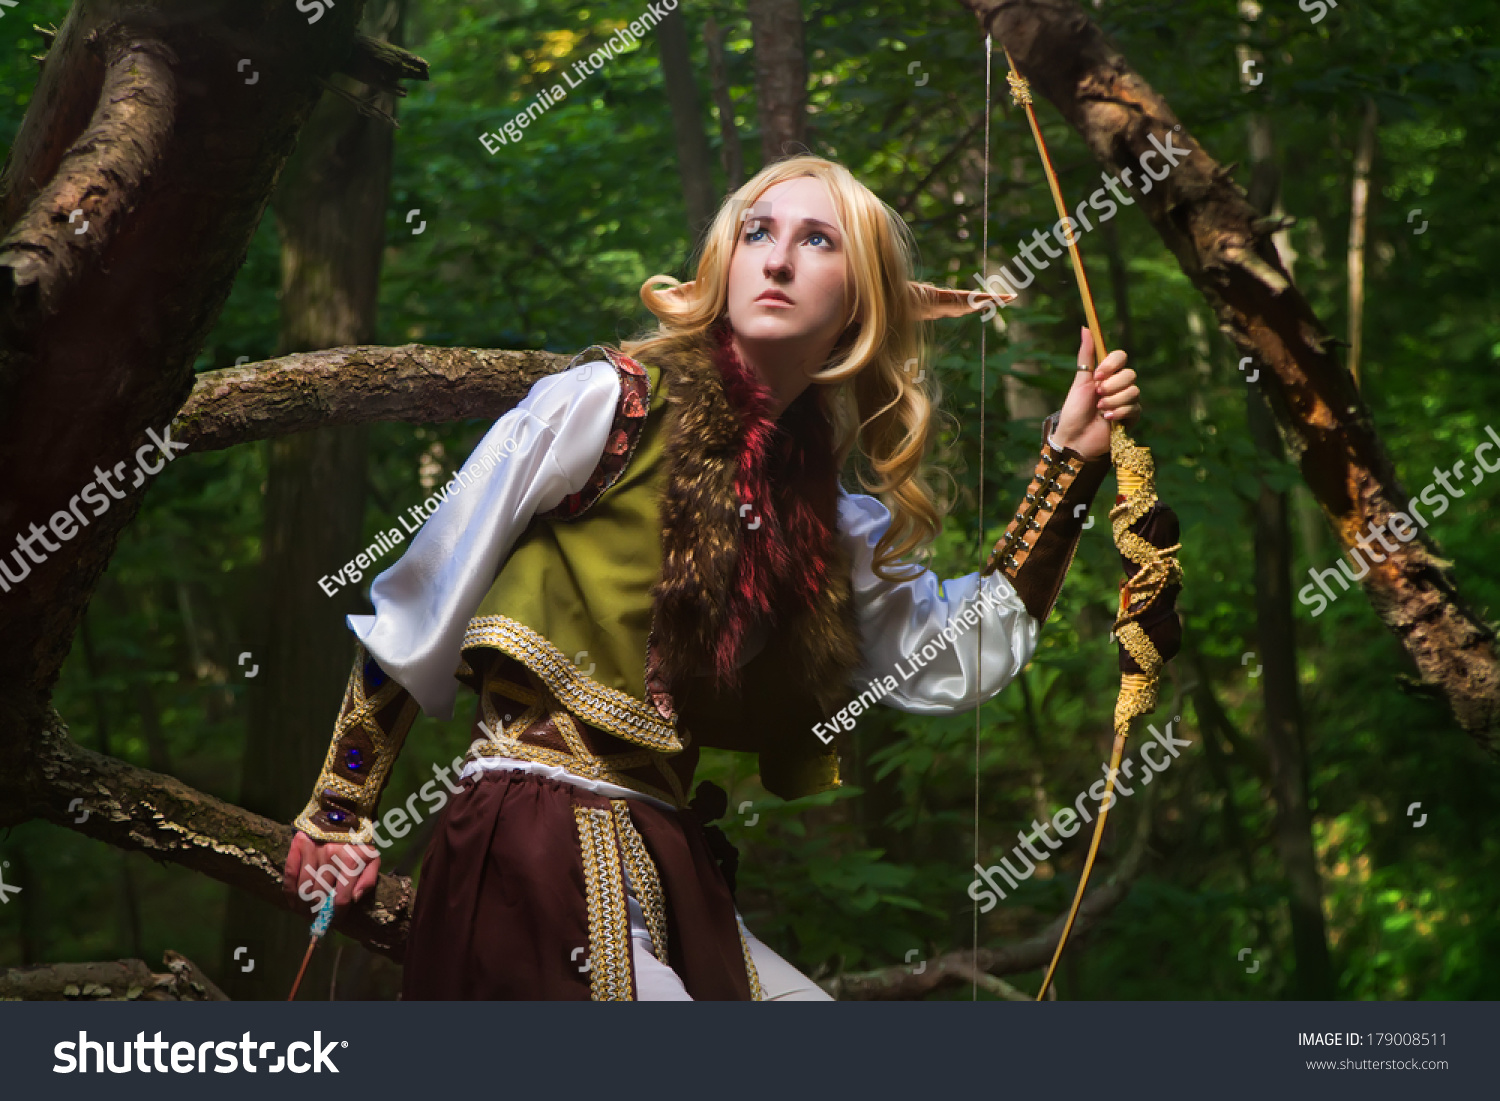 Elf Holding A Bow With An Arrow Stock Photo 179008511 : Shutterstock